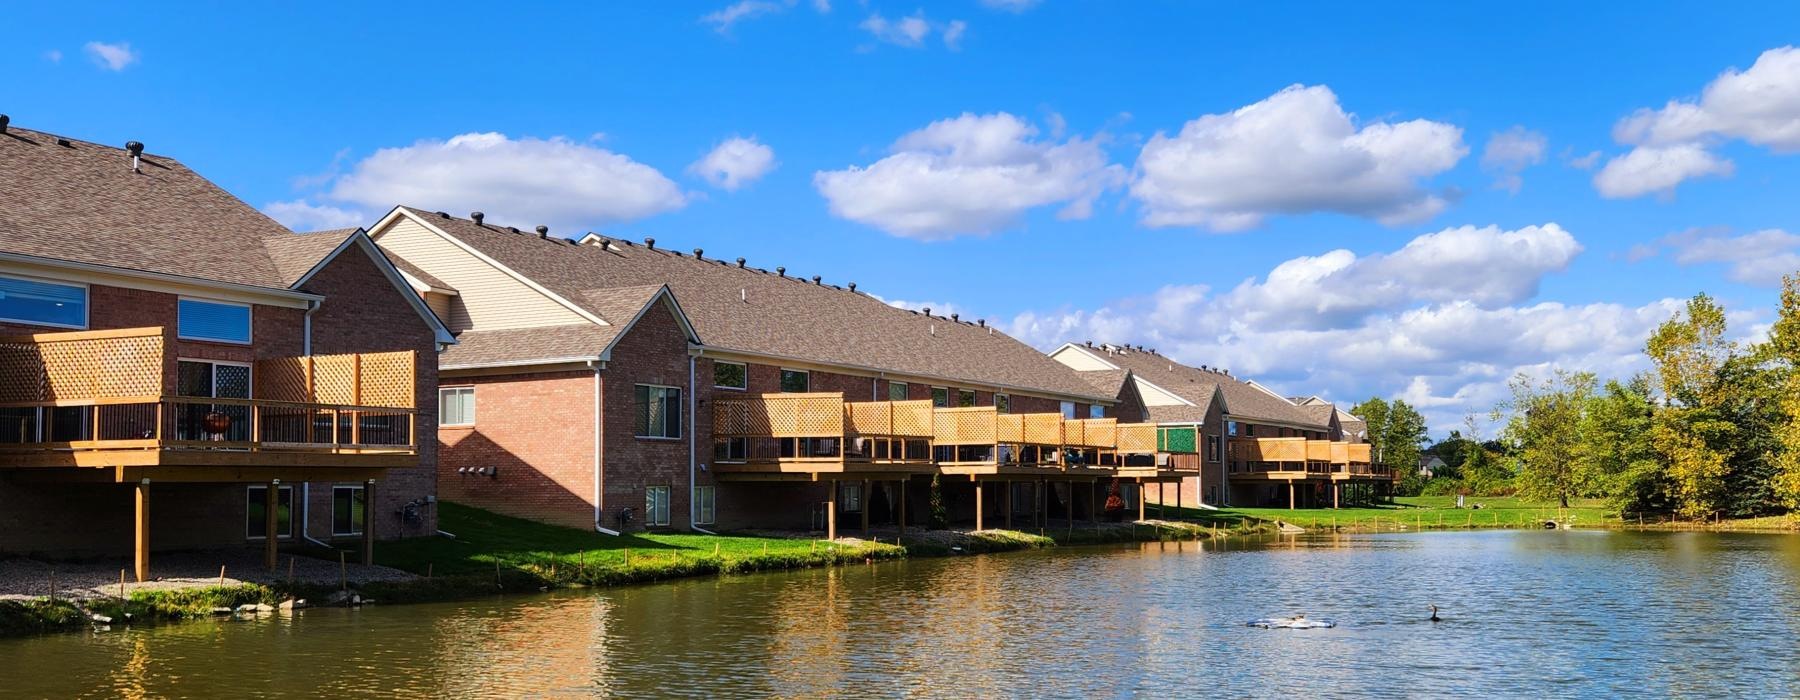 a row of houses on a river